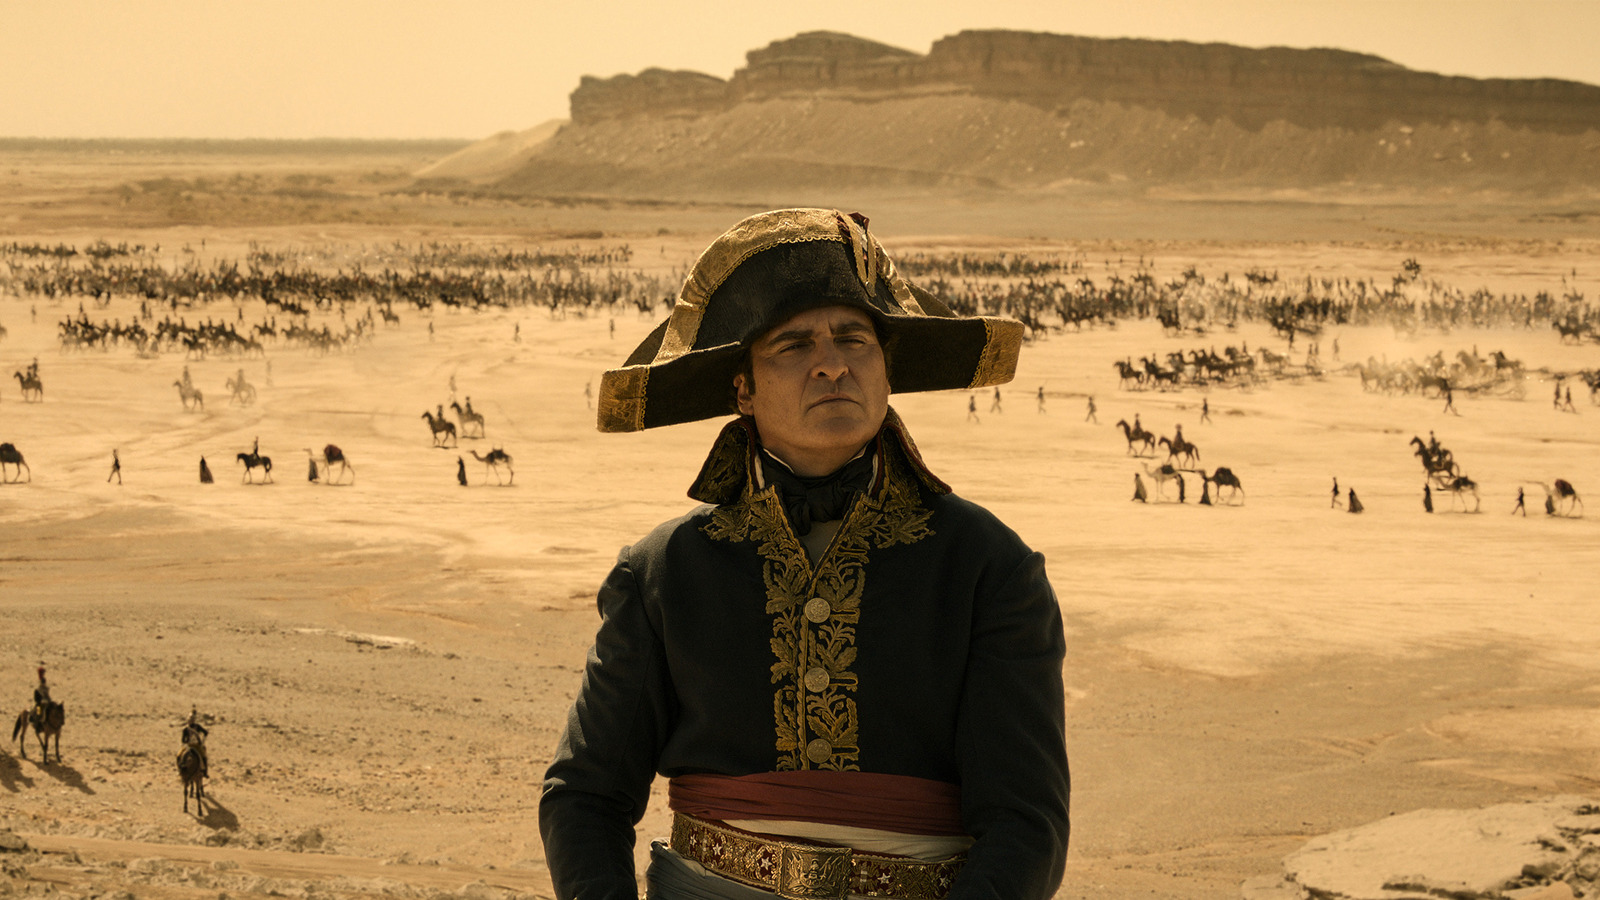 Napoleon Review: Ridley Scott's historical epic only scratches the surface